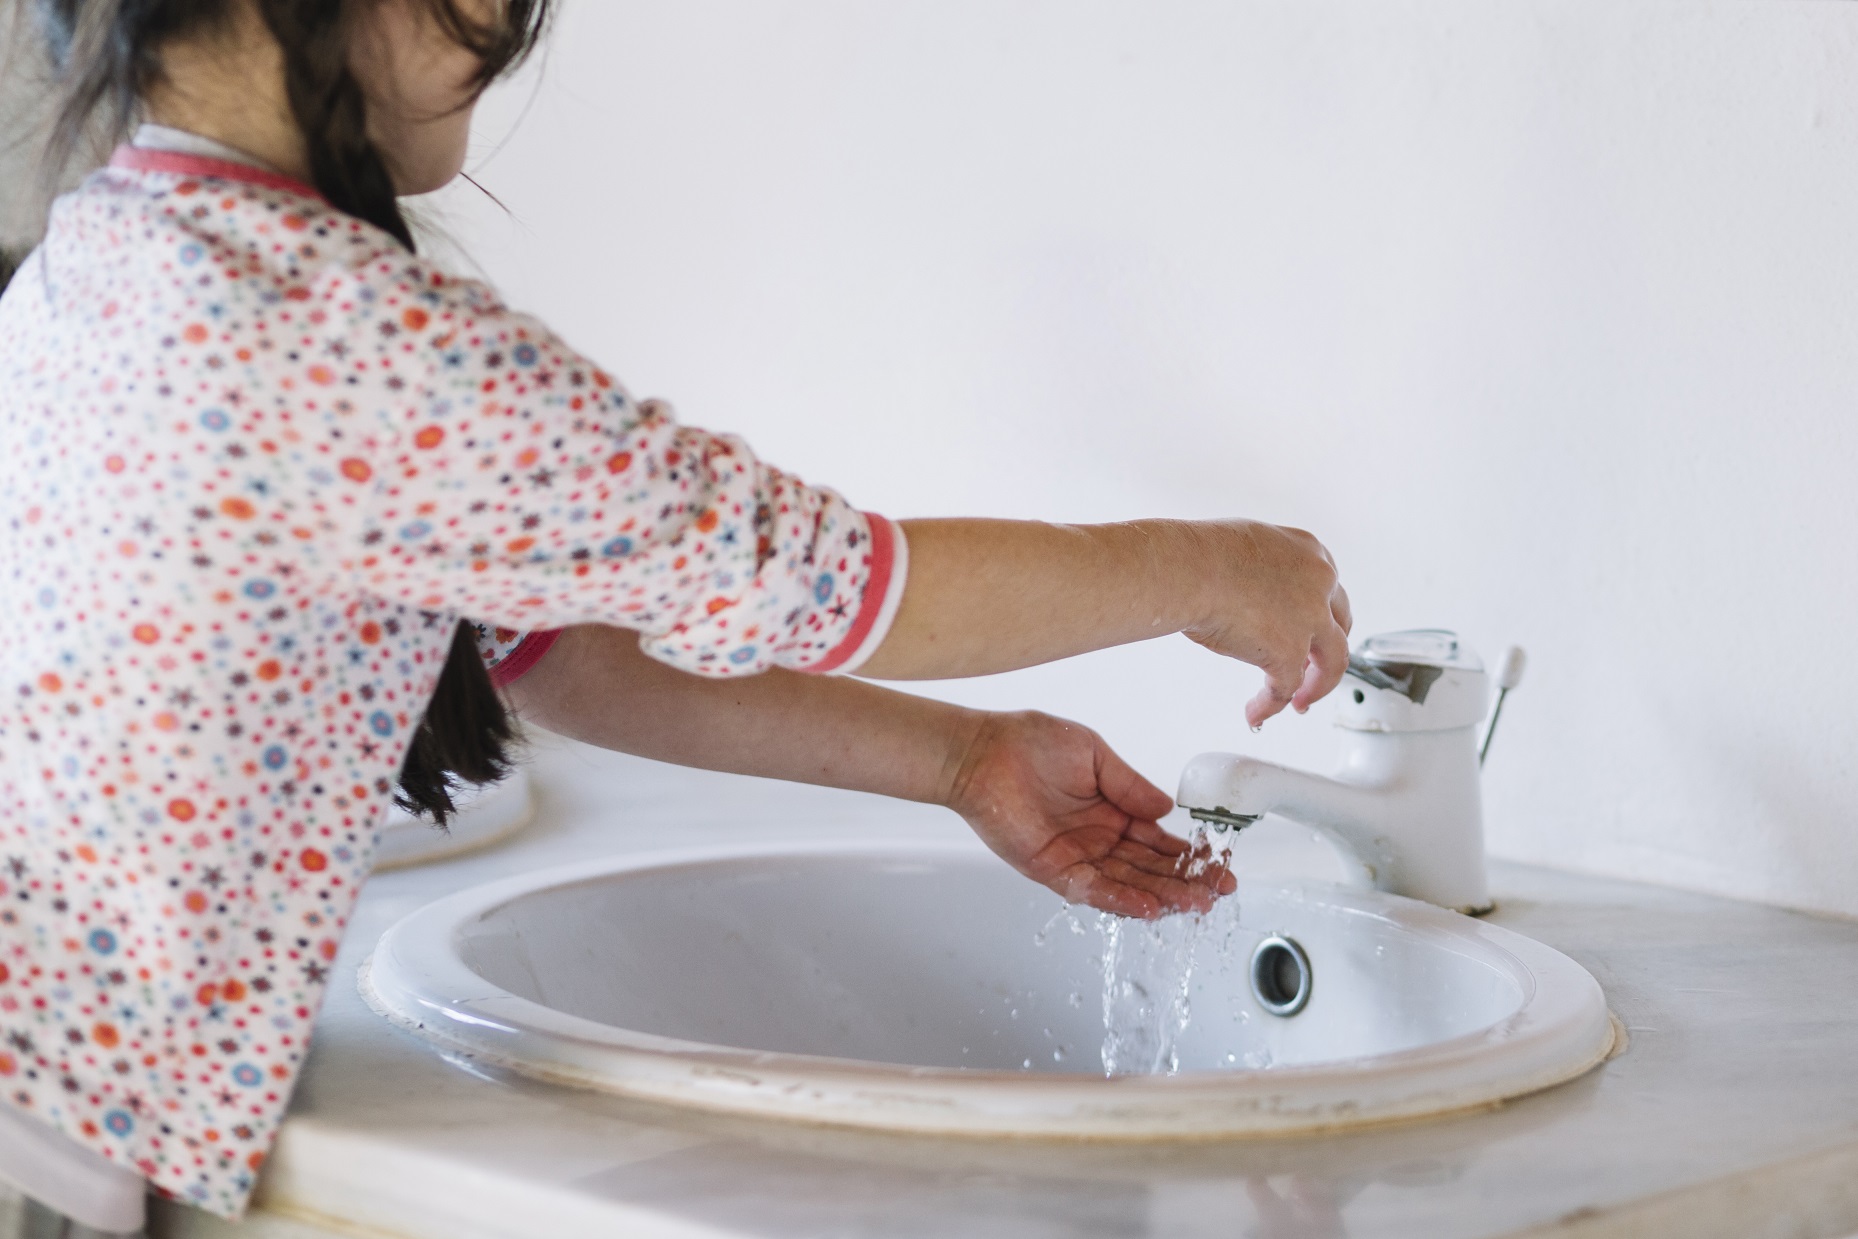 Hand, Foot & Mouth Disease (HFMD) - Little girl washing hands